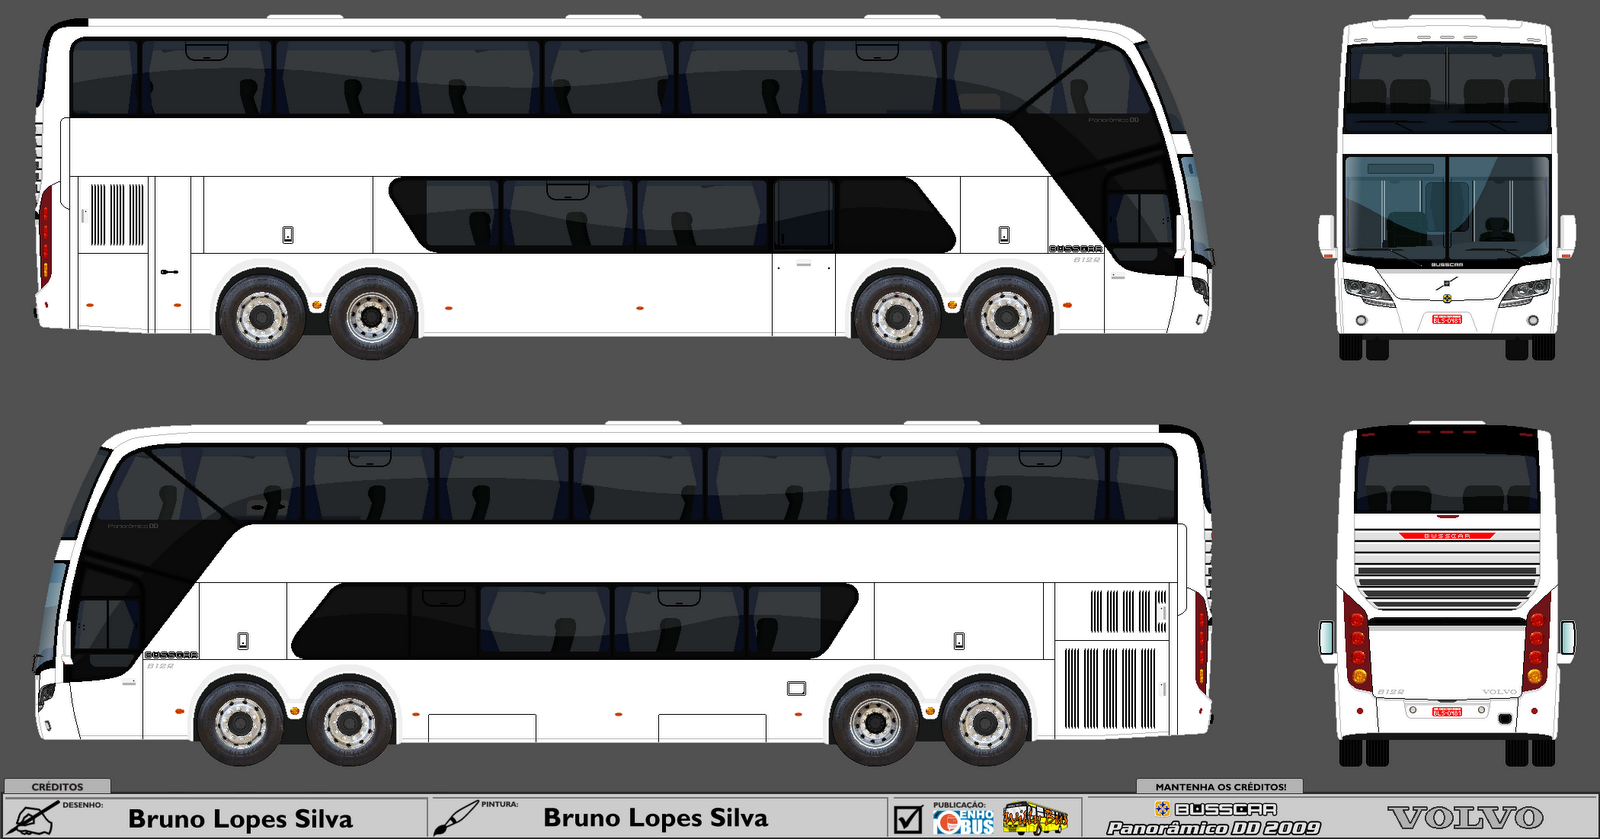 On this page we present you the most successful photo gallery of Volvo B12R